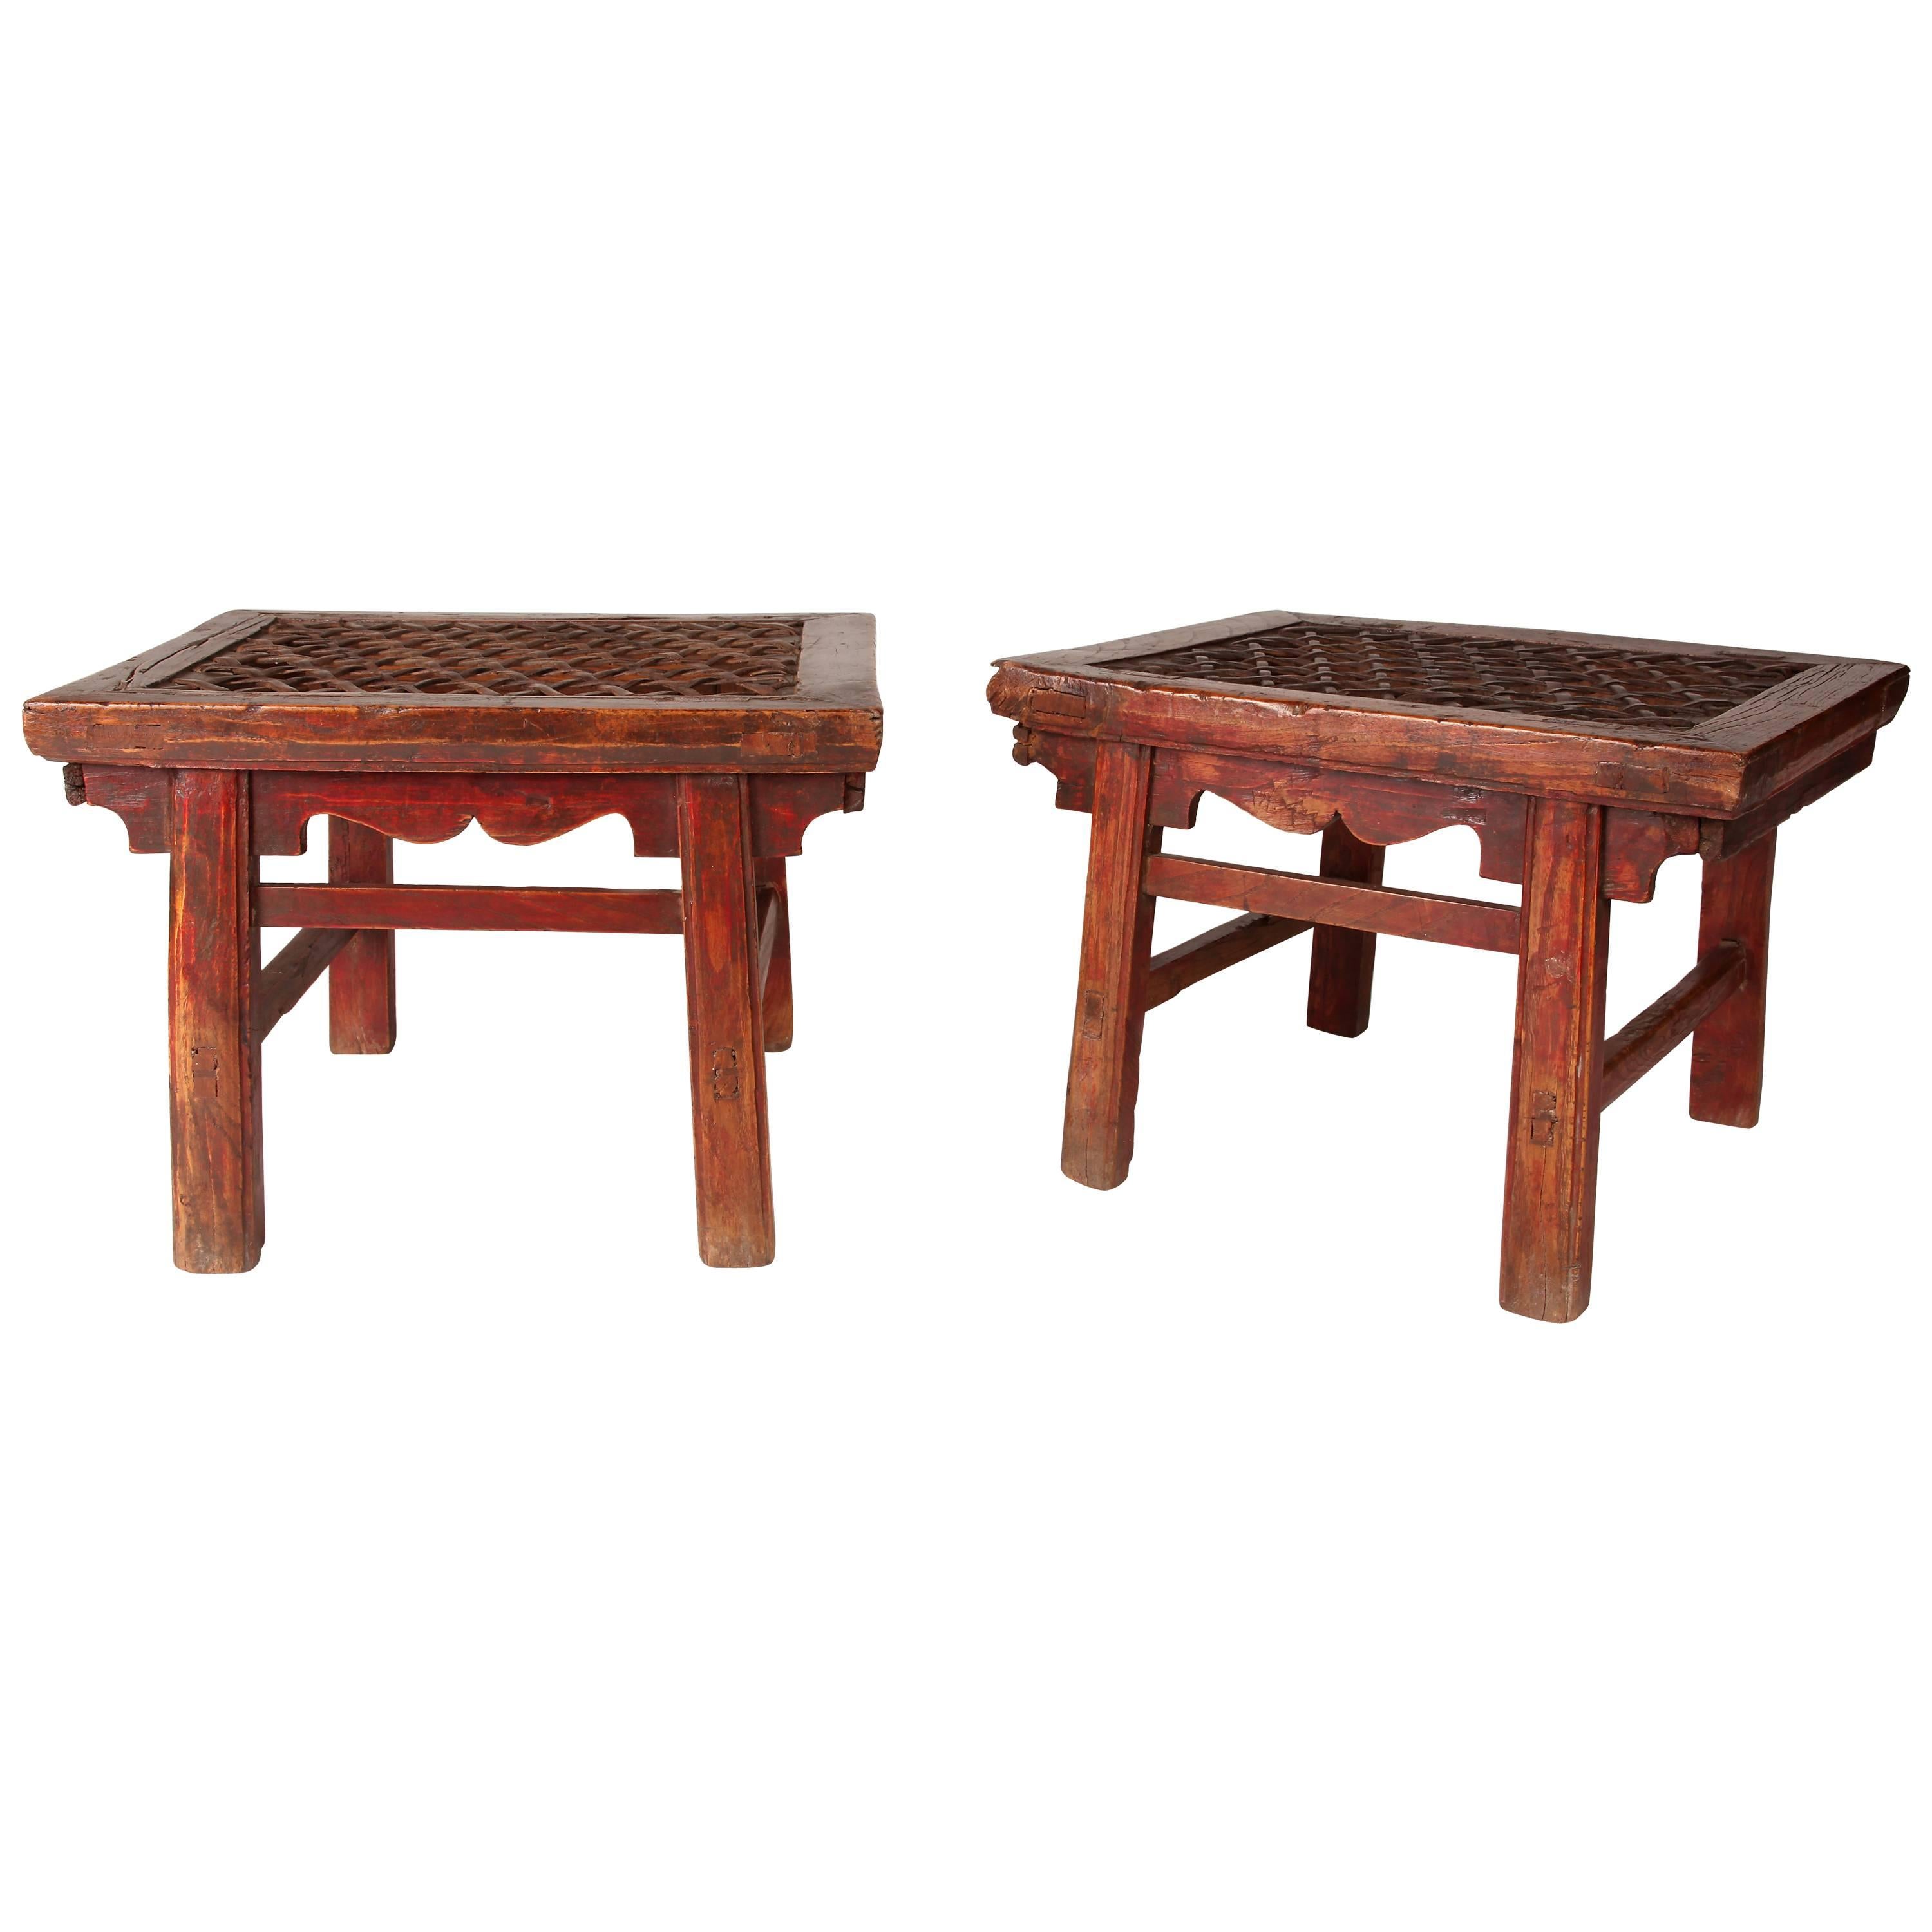 Chinese Rectangular Stool with Woven Seat